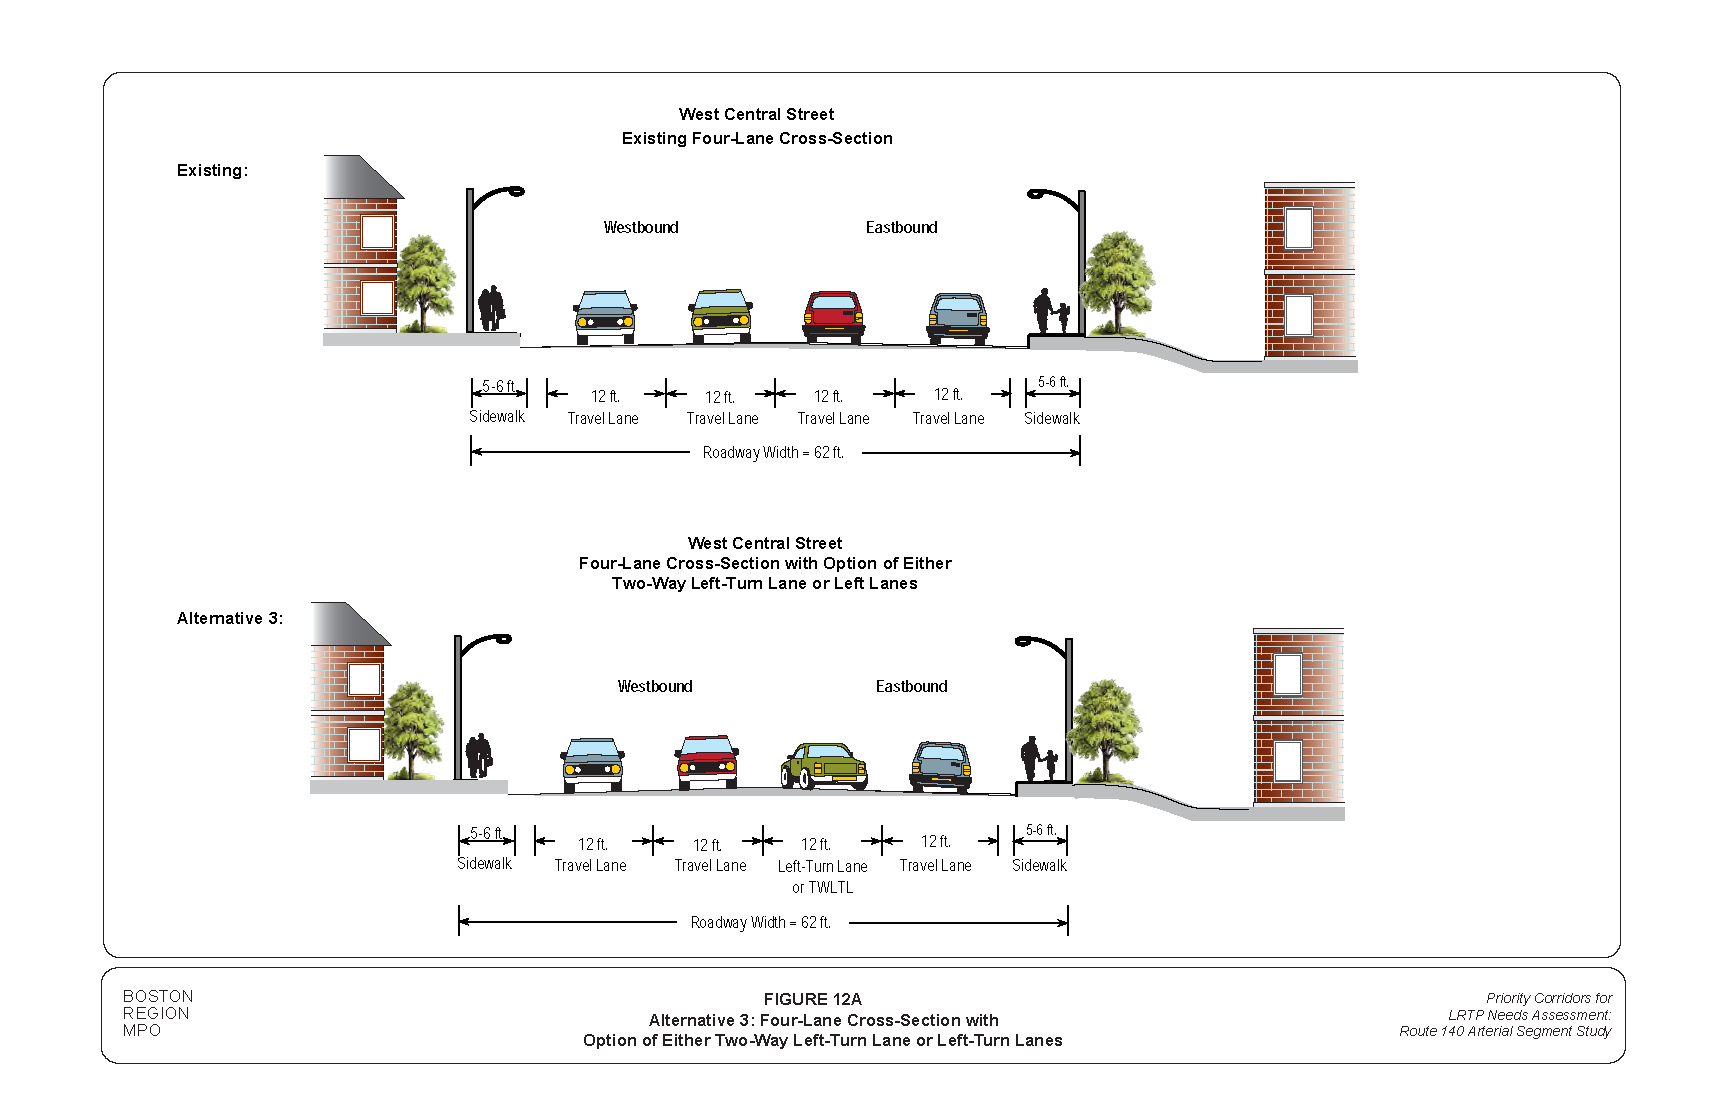 FIGURE 12A: Alternative 3: Four-Lane Cross-Section with Option of Either Two-Way Left-Turn Lane or Left-Turn Lanes. Computer-drawn roadway cross-section that portrays MPO staff “Improvement Alternative 3,” which recommends reconfiguring West Central Street into a four-lane cross-section with option of either two-way left-turn lane or left-turn lanes.